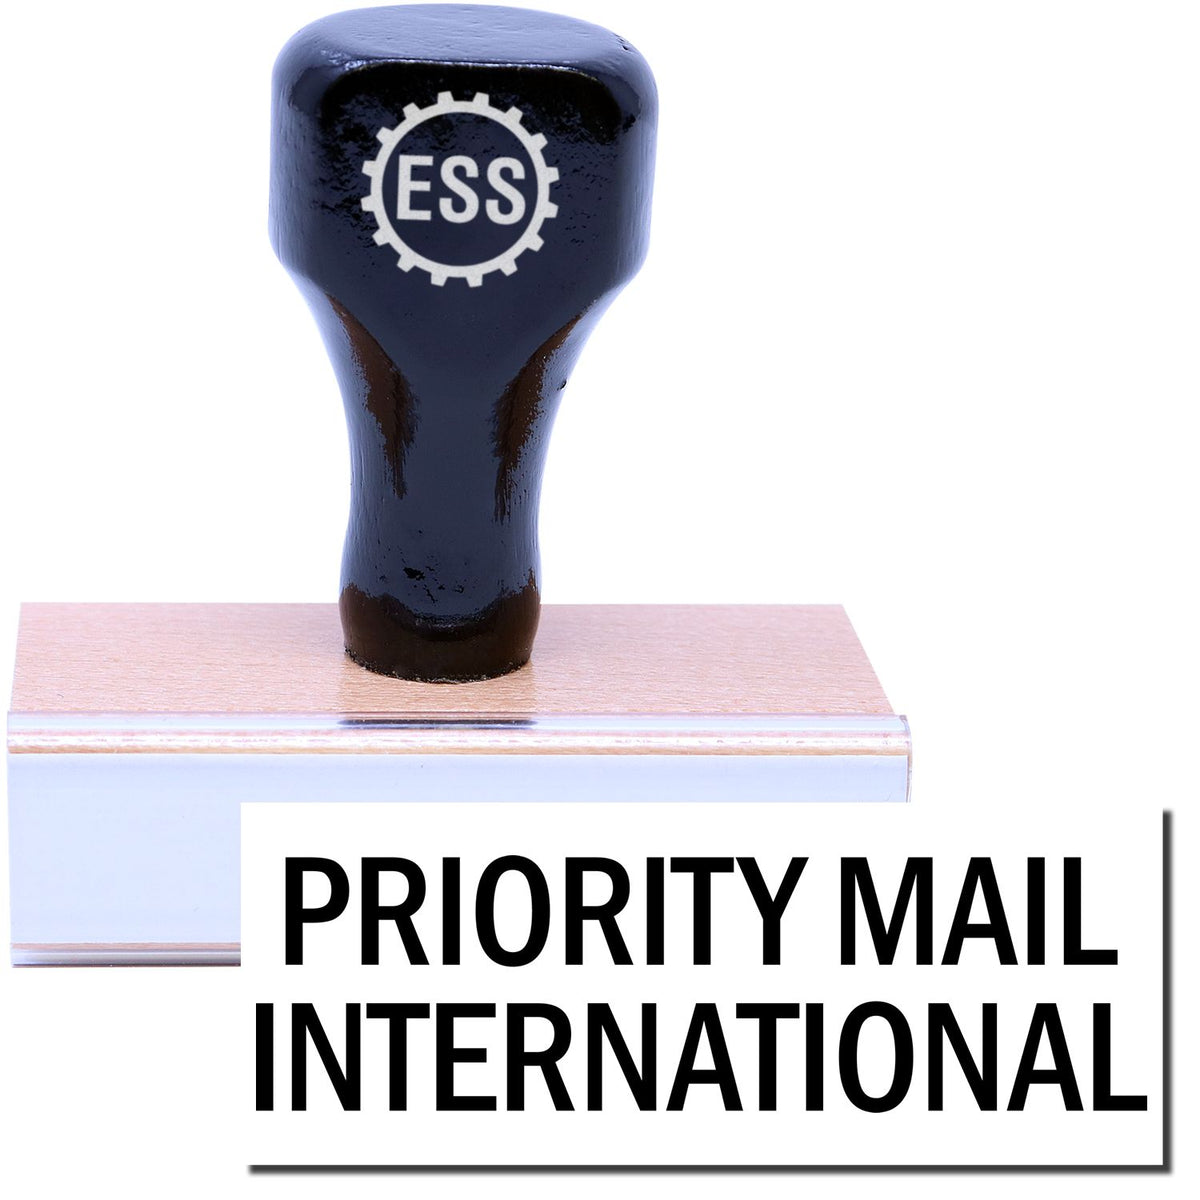 A stock office rubber stamp with a stamped image showing how the text &quot;PRIORITY MAIL INTERNATIONAL&quot; in a large font is displayed after stamping.